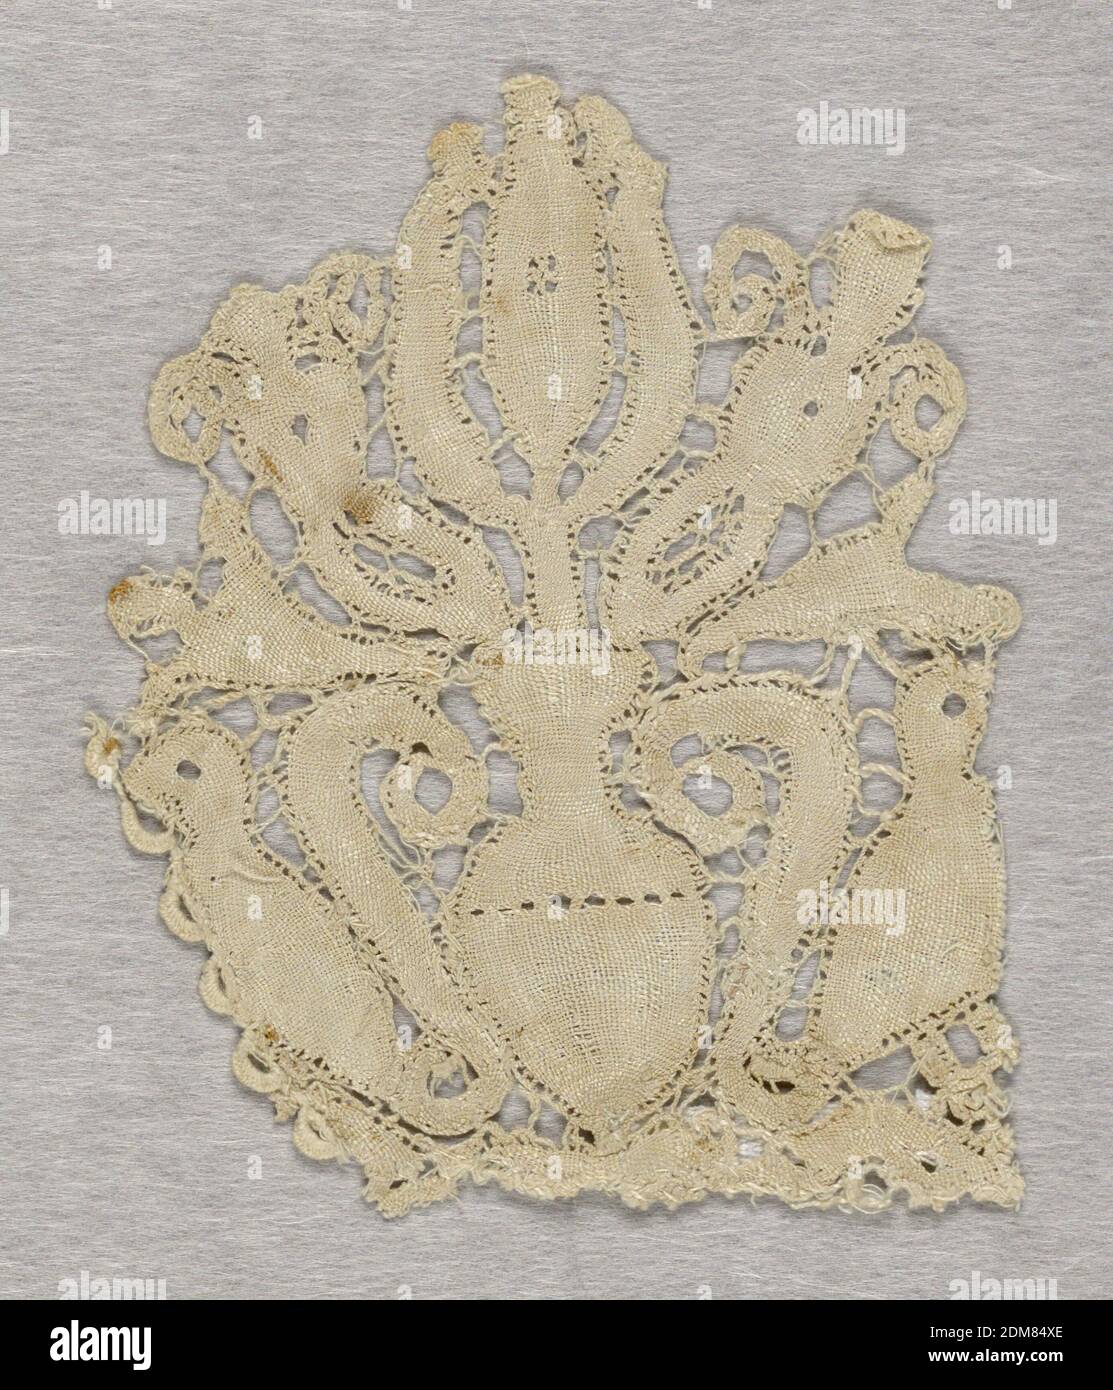 Fragment, Medium: Technique: bobbin lace, discontinuous tape, Fragment with vases of flowers forming tabs., Italy, 17th century, lace, Fragment Stock Photo